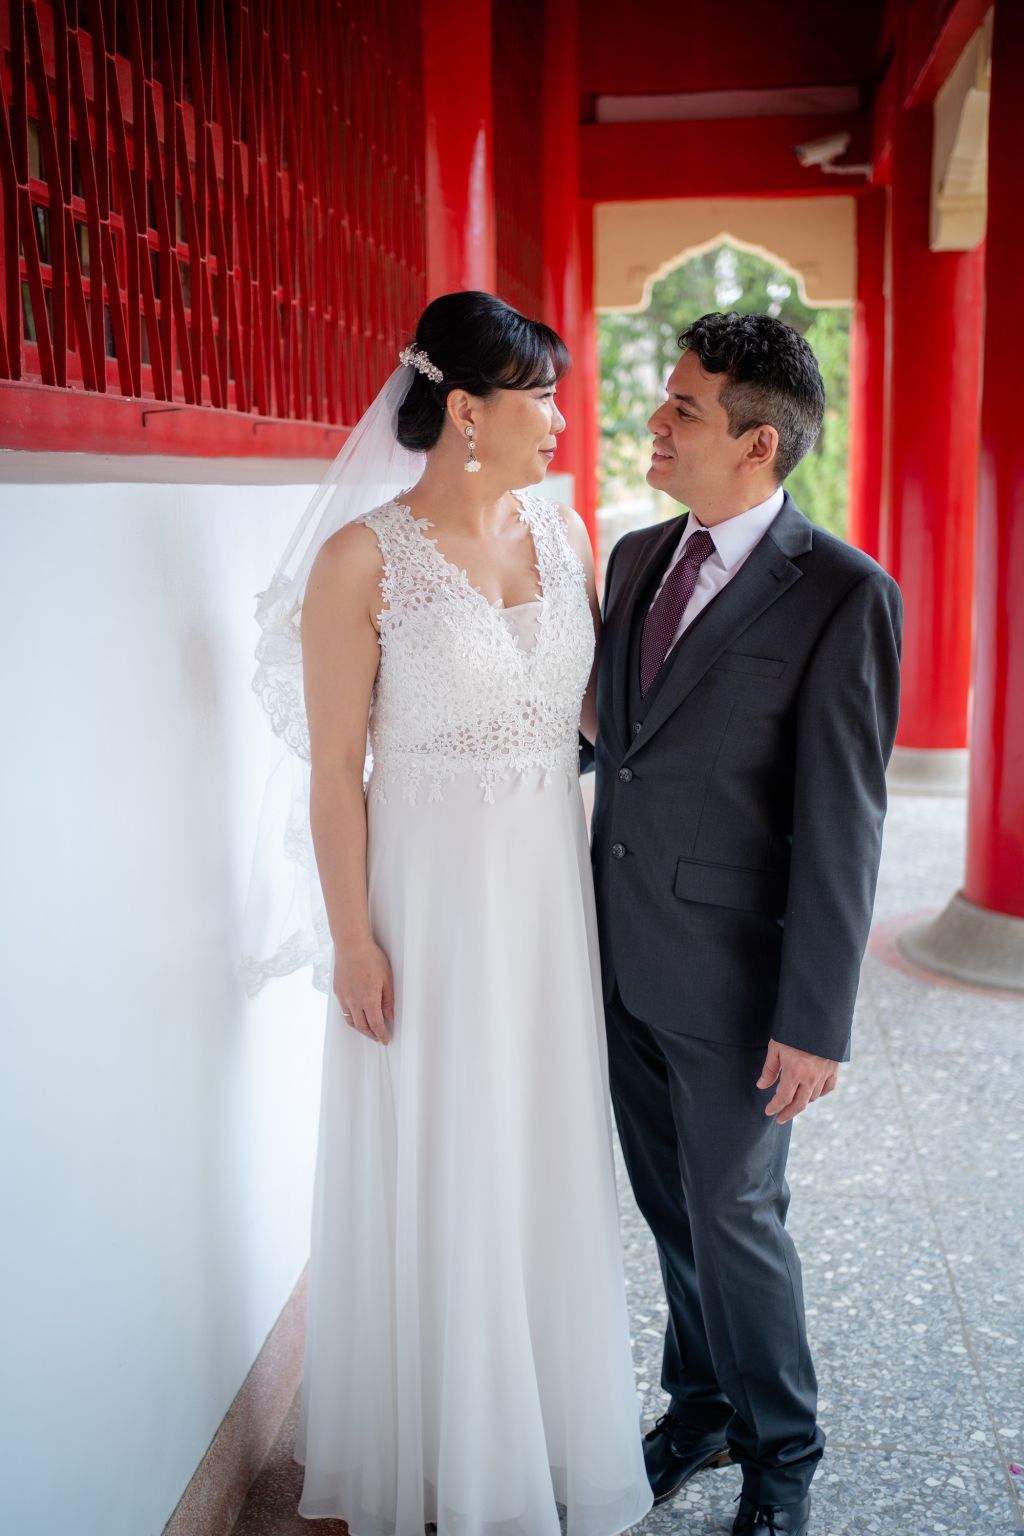 A newly married Christian couple gaze into each other's eyes next to pillars in Taiwan